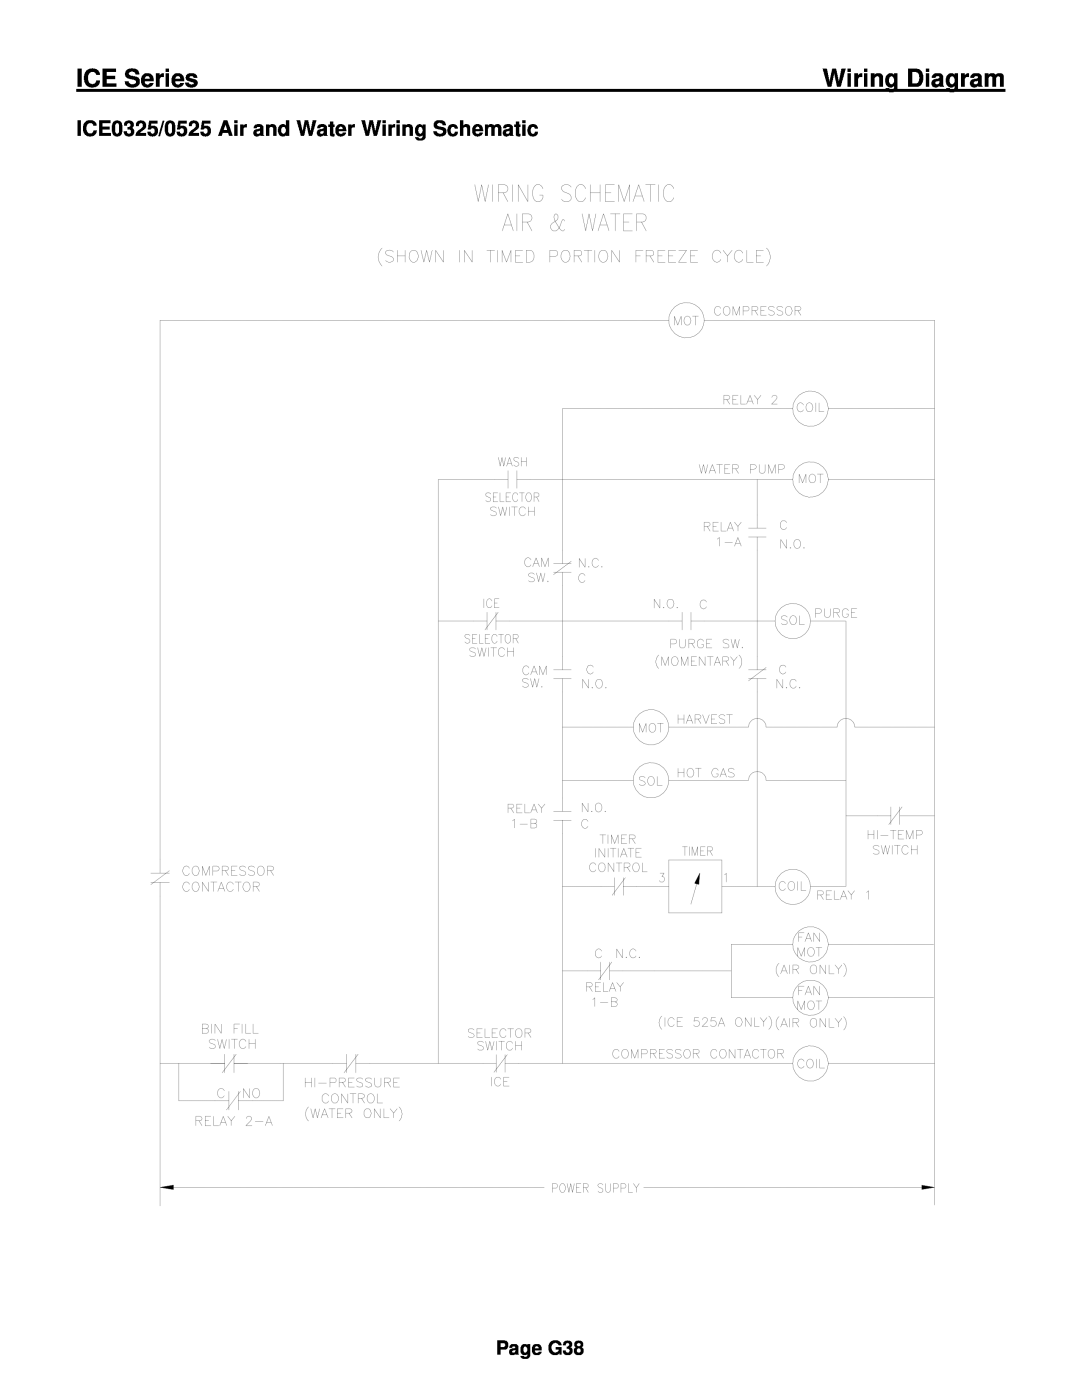 Ice-O-Matic ICE0250 Series ICE0325/0525 Air and Water Wiring Schematic, ICE Series, Wiring Diagram, Page G38 